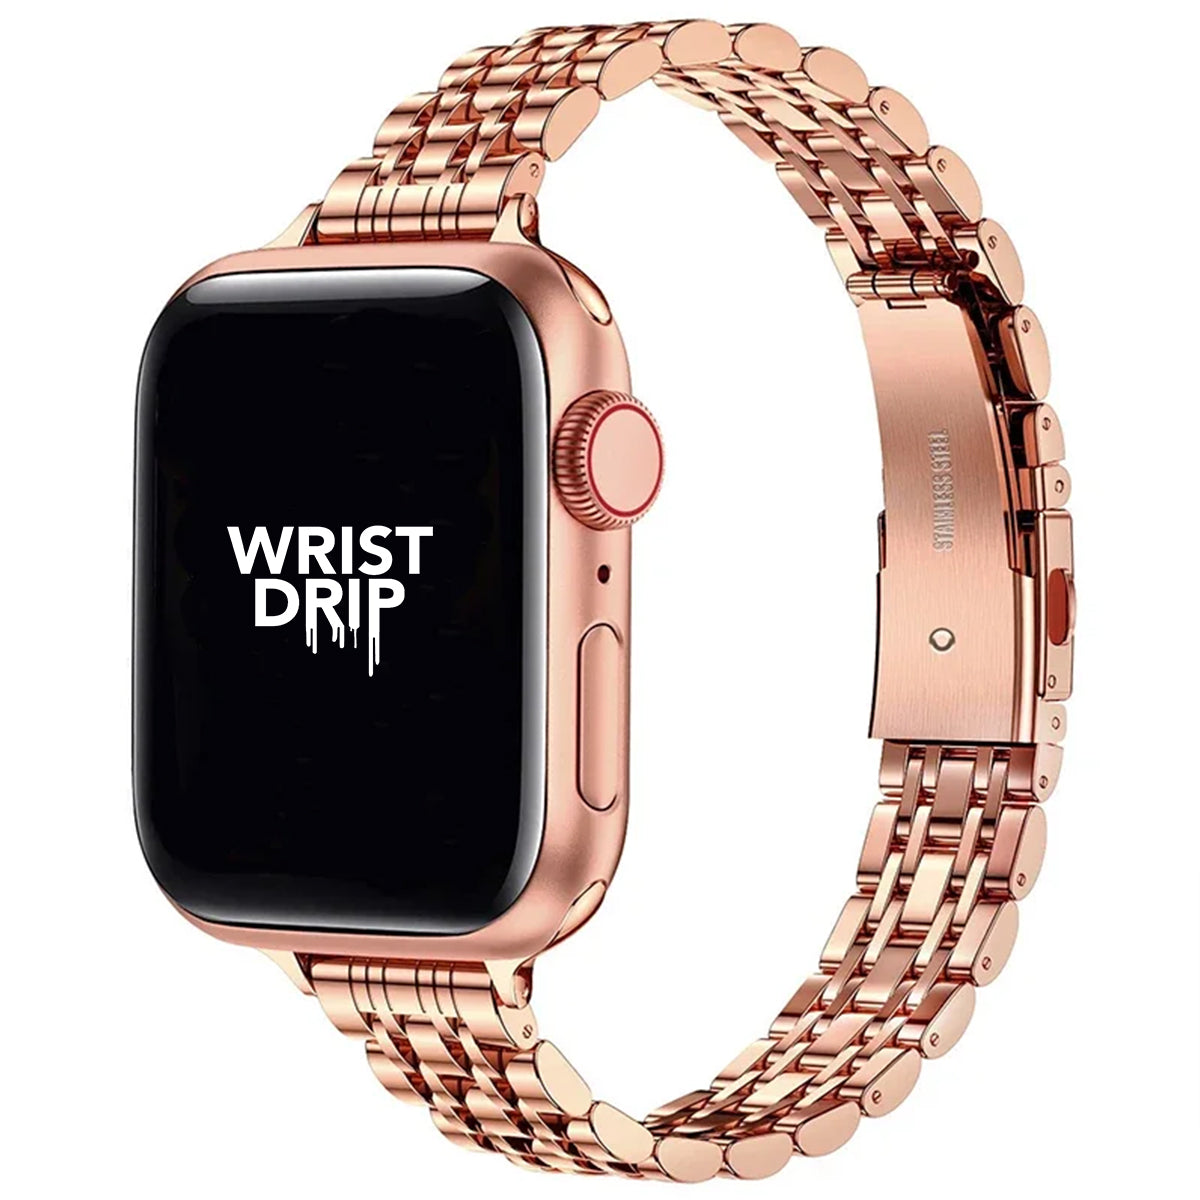 The Maeve Women's Stainless Steel Apple Watch Band (7 Colours)